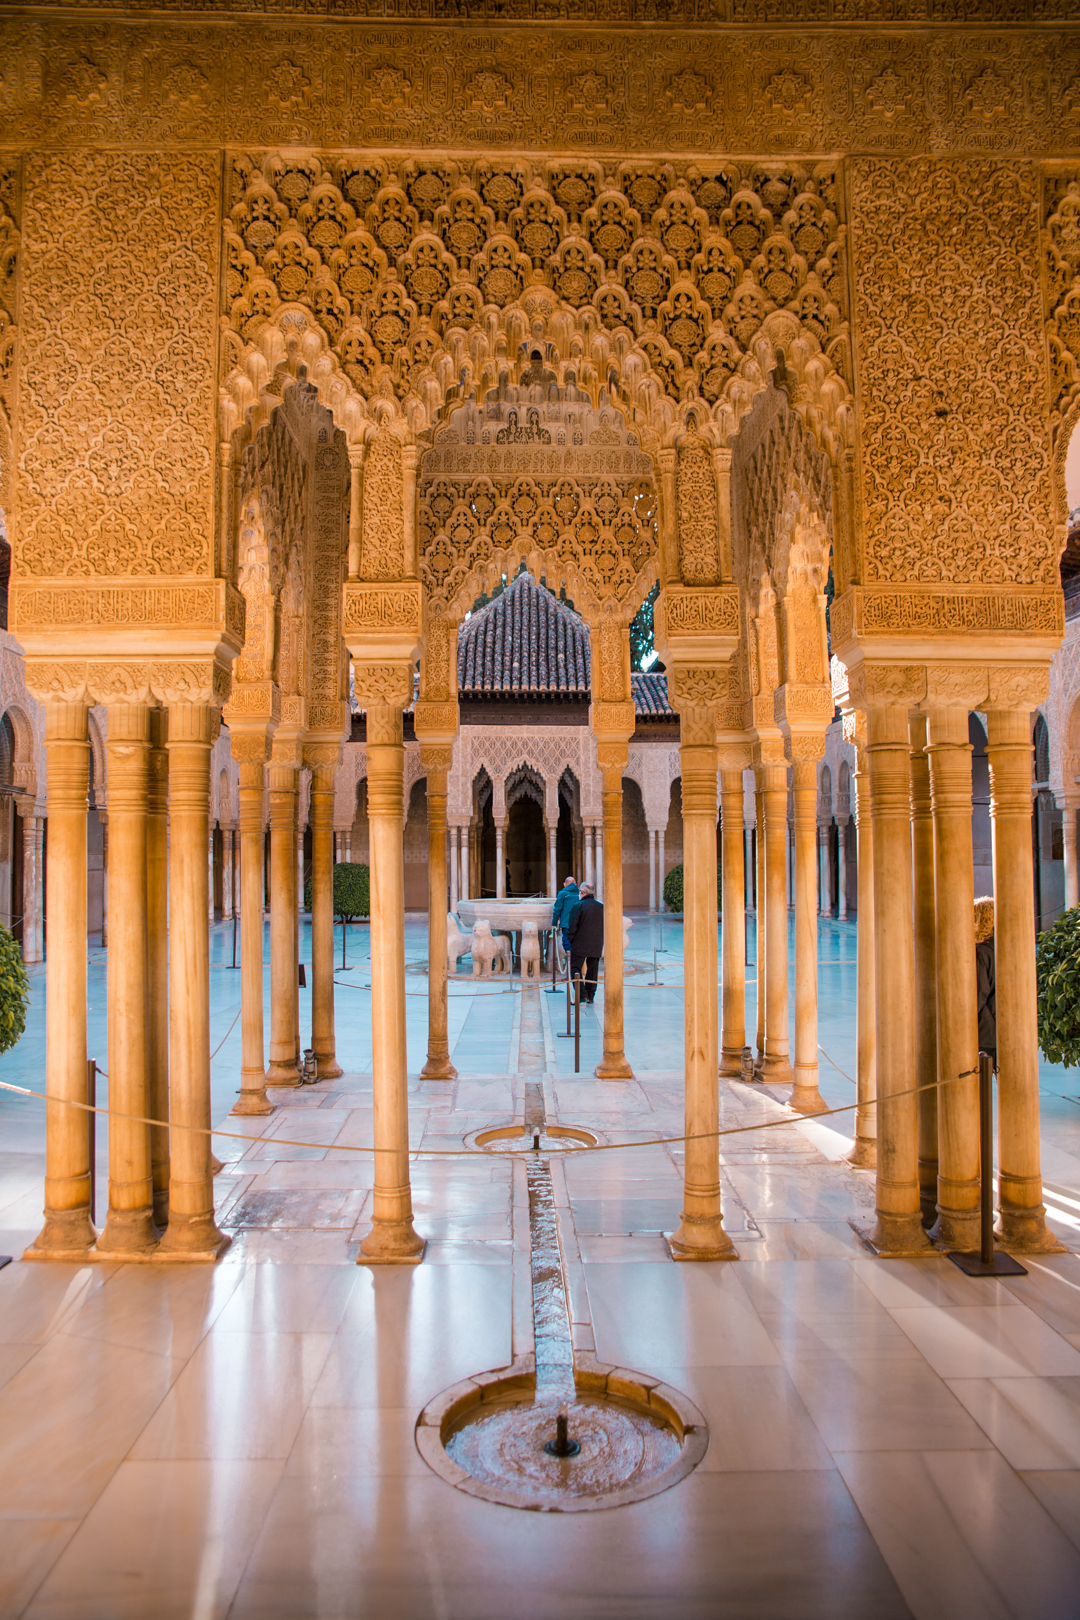 Court of the Lions in Alhambra, Granada Spain.